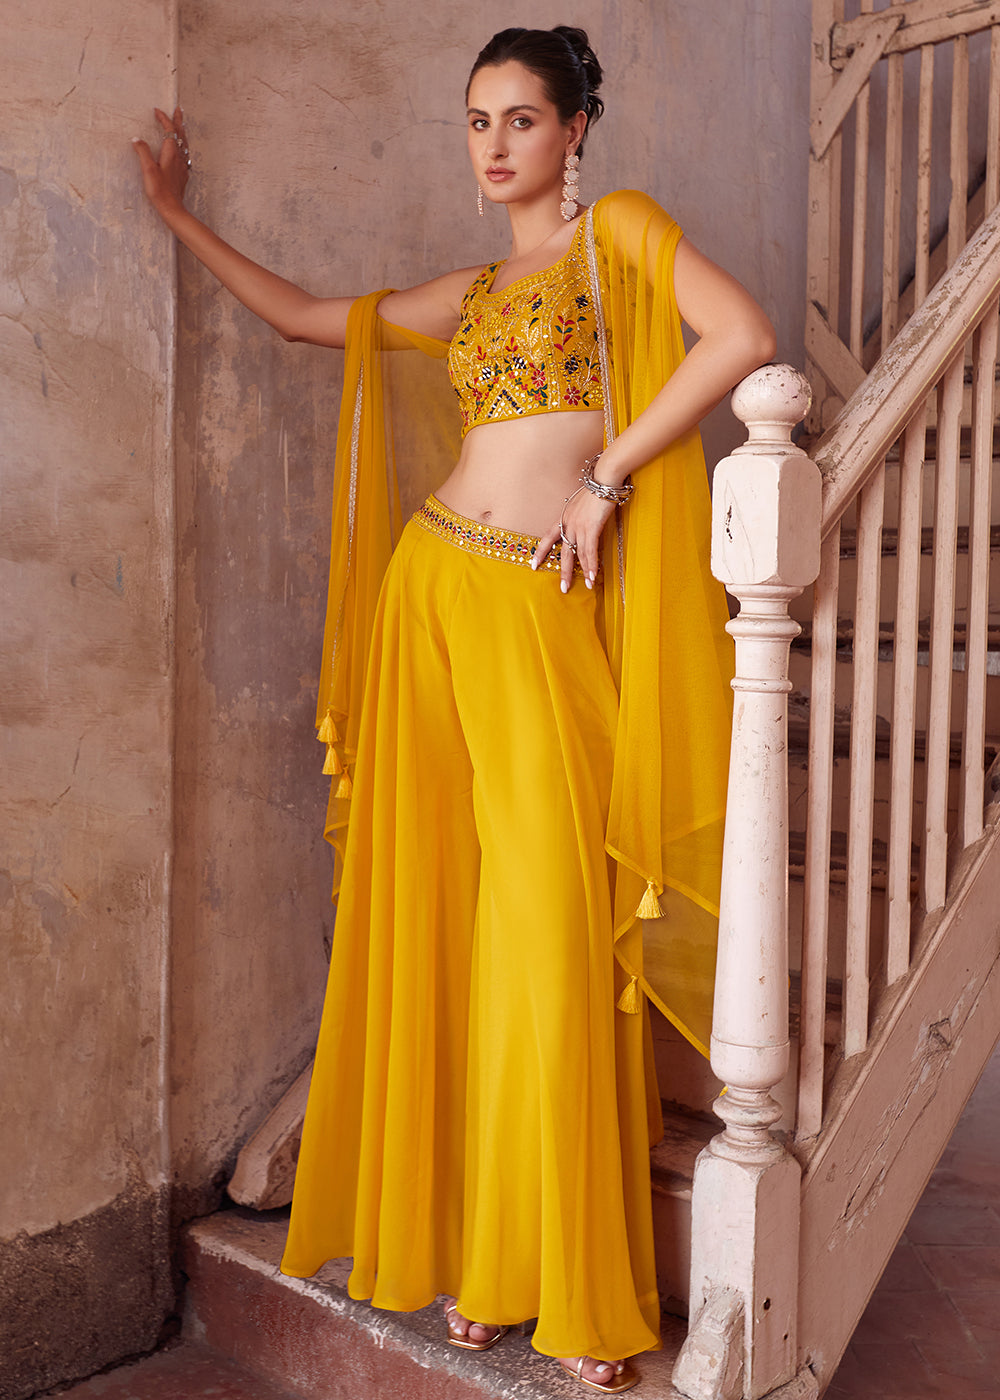 Shop Now Stunning Yellow Designer Crop Top Style Sharara Suit Online at Empress Clothing in USA, UK, Canada, Italy & Worldwide.